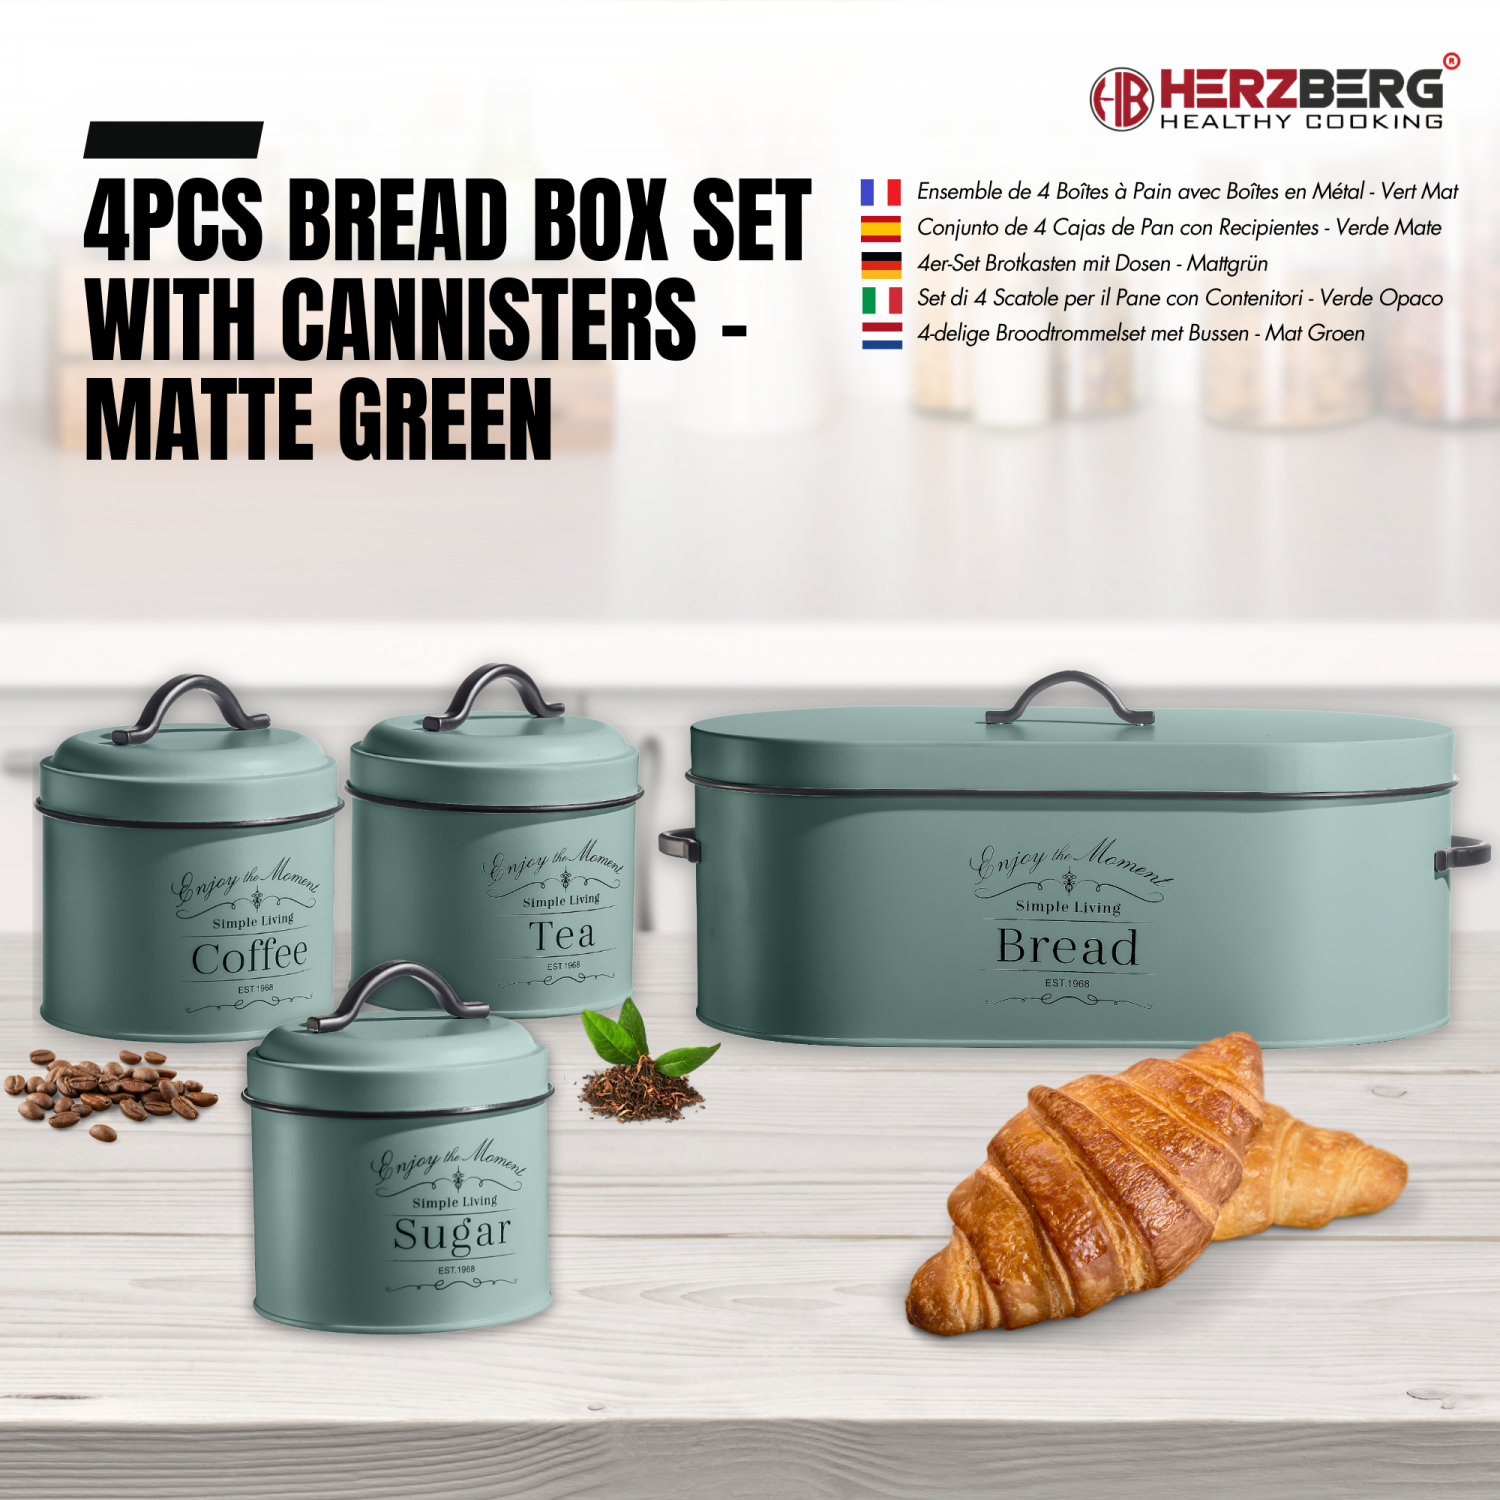 Herzberg HG-04425: 4 Pieces Vintage Bread Box and Canister Set - Sage Green